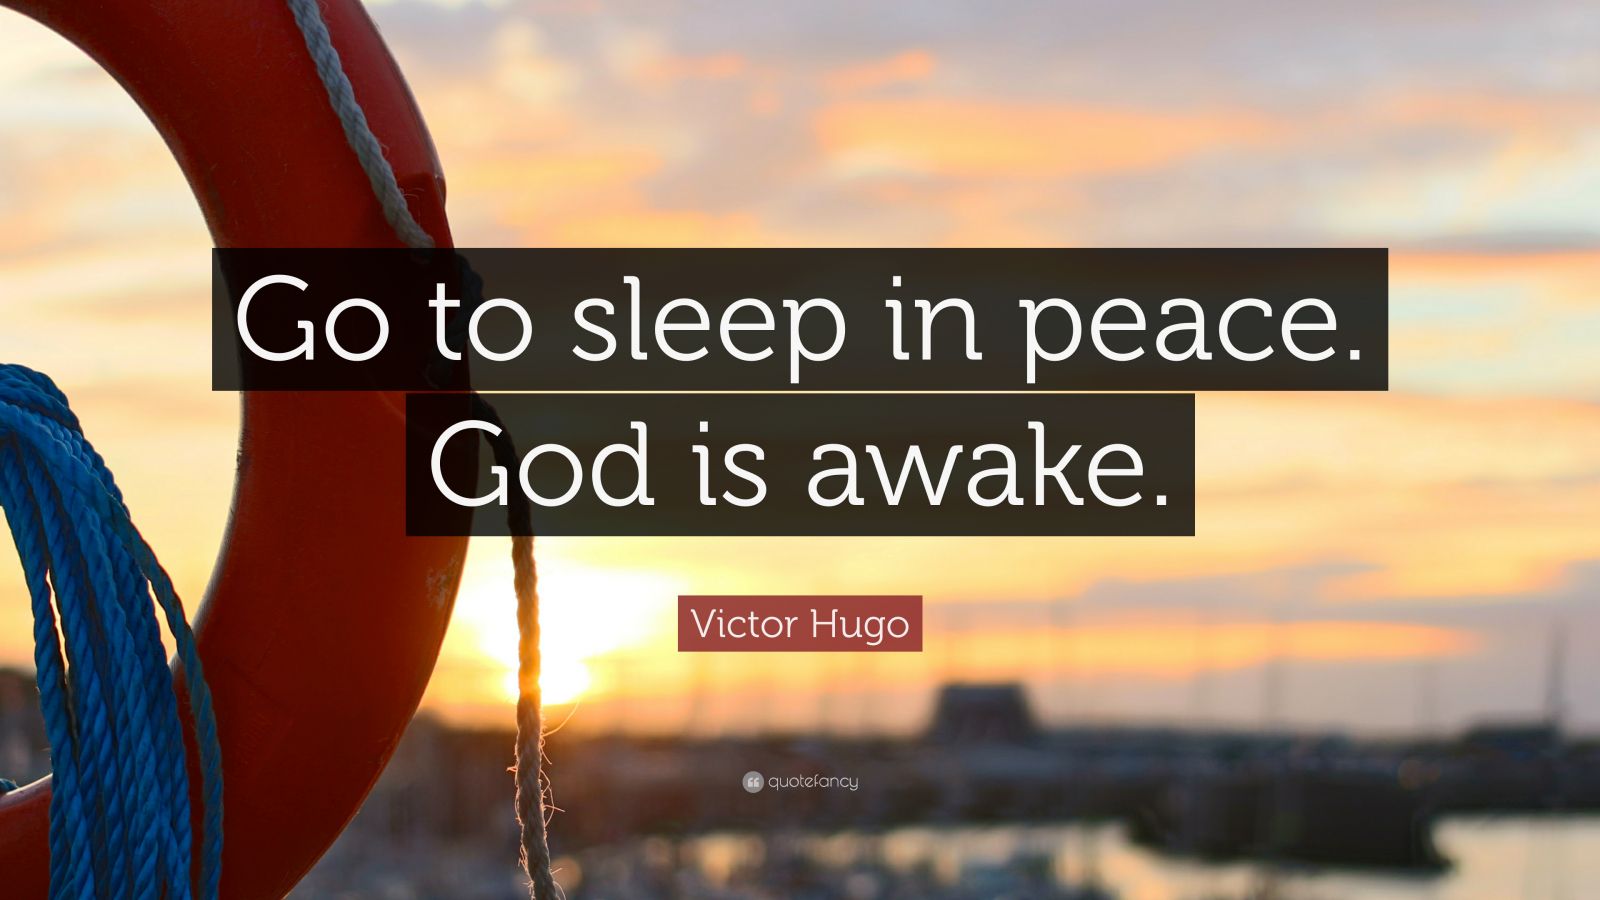 Victor Hugo Quote: “Go to sleep in peace. God is awake.” (12 wallpapers